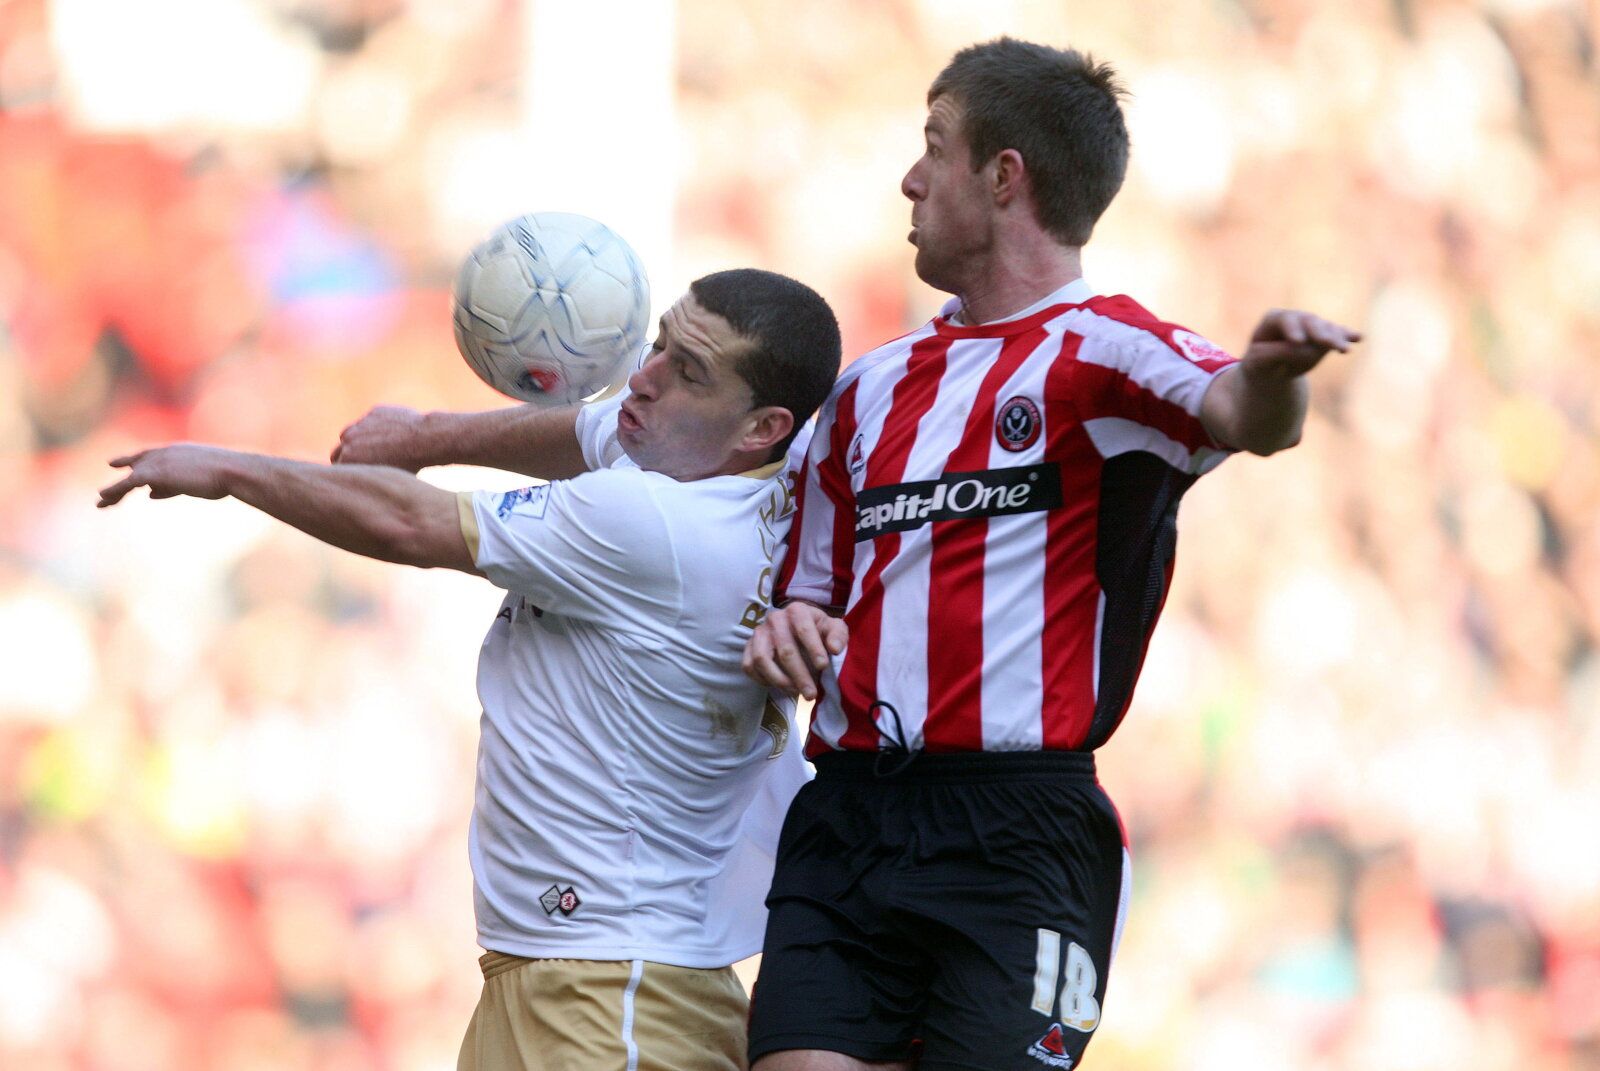 Football - Sheffield United v Middlesbrough FA Cup Fifth Round  - Bramall Lane - 17/2/08 
Fabio Rochemback of Middlesbrough (L) and Michael Tonge of Sheffield United 
Mandatory Credit: Action Images / Michael Regan 
Livepic